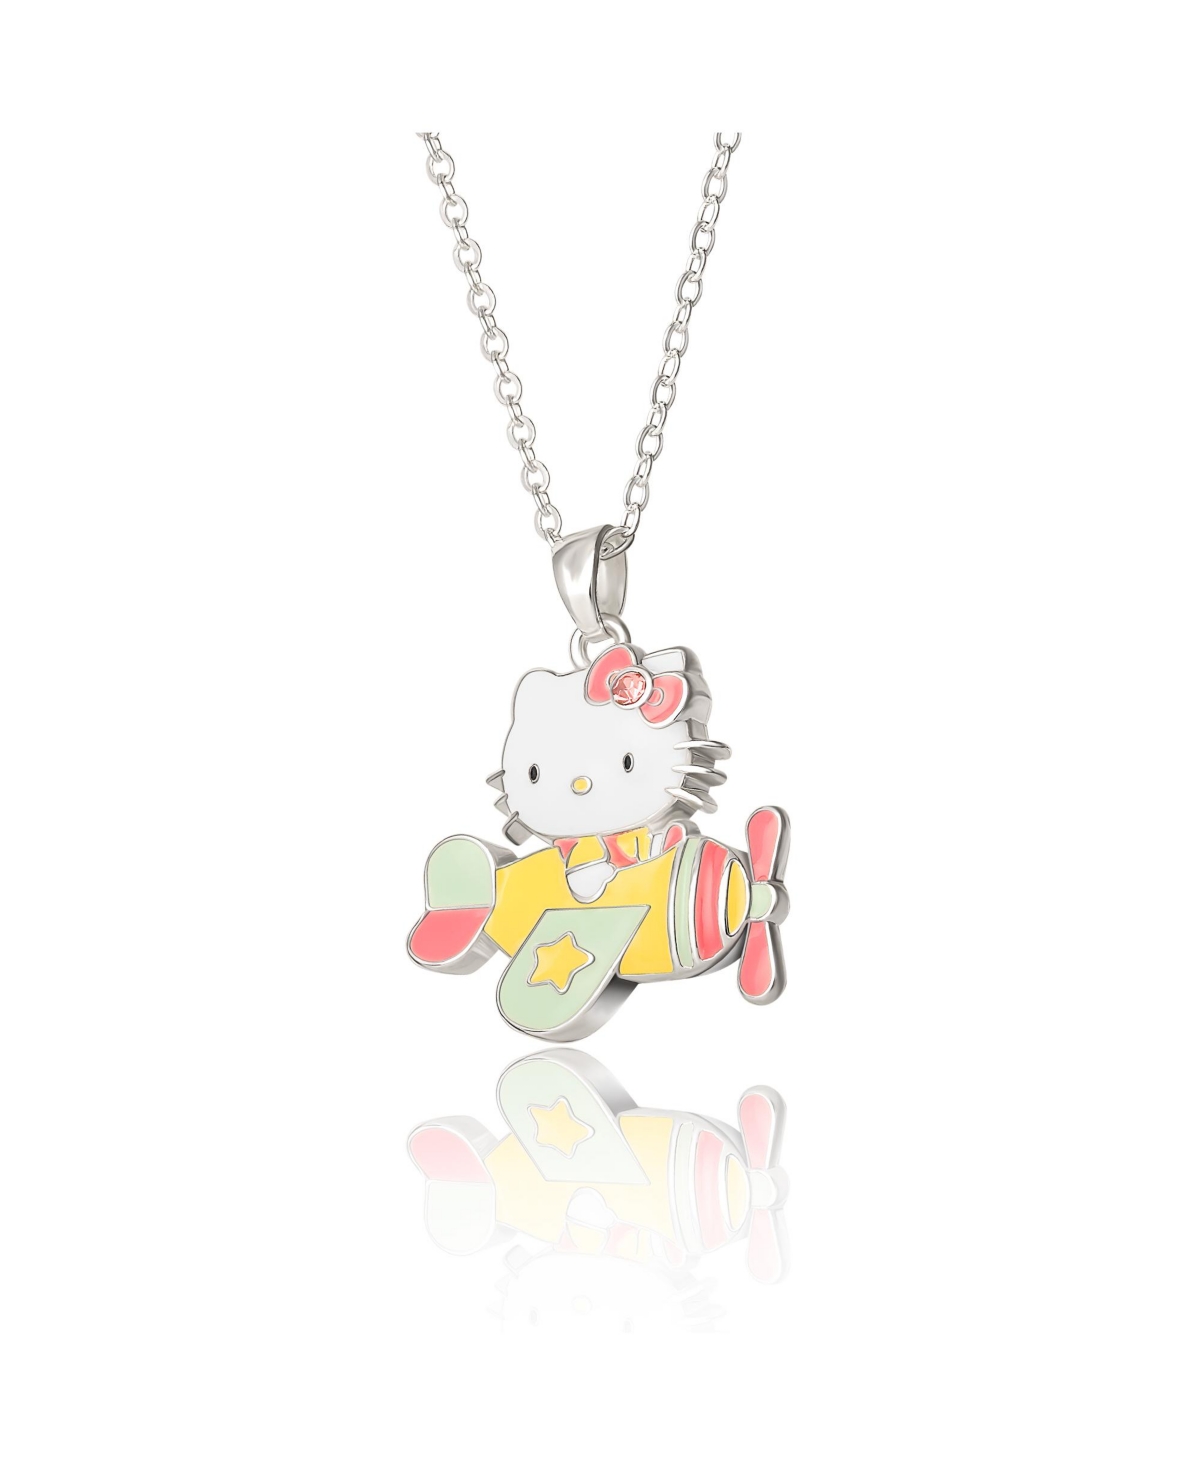 Sanrio Silver Plated Enamel Pink Crystal 3D Plane Necklace - White, yellow, pink